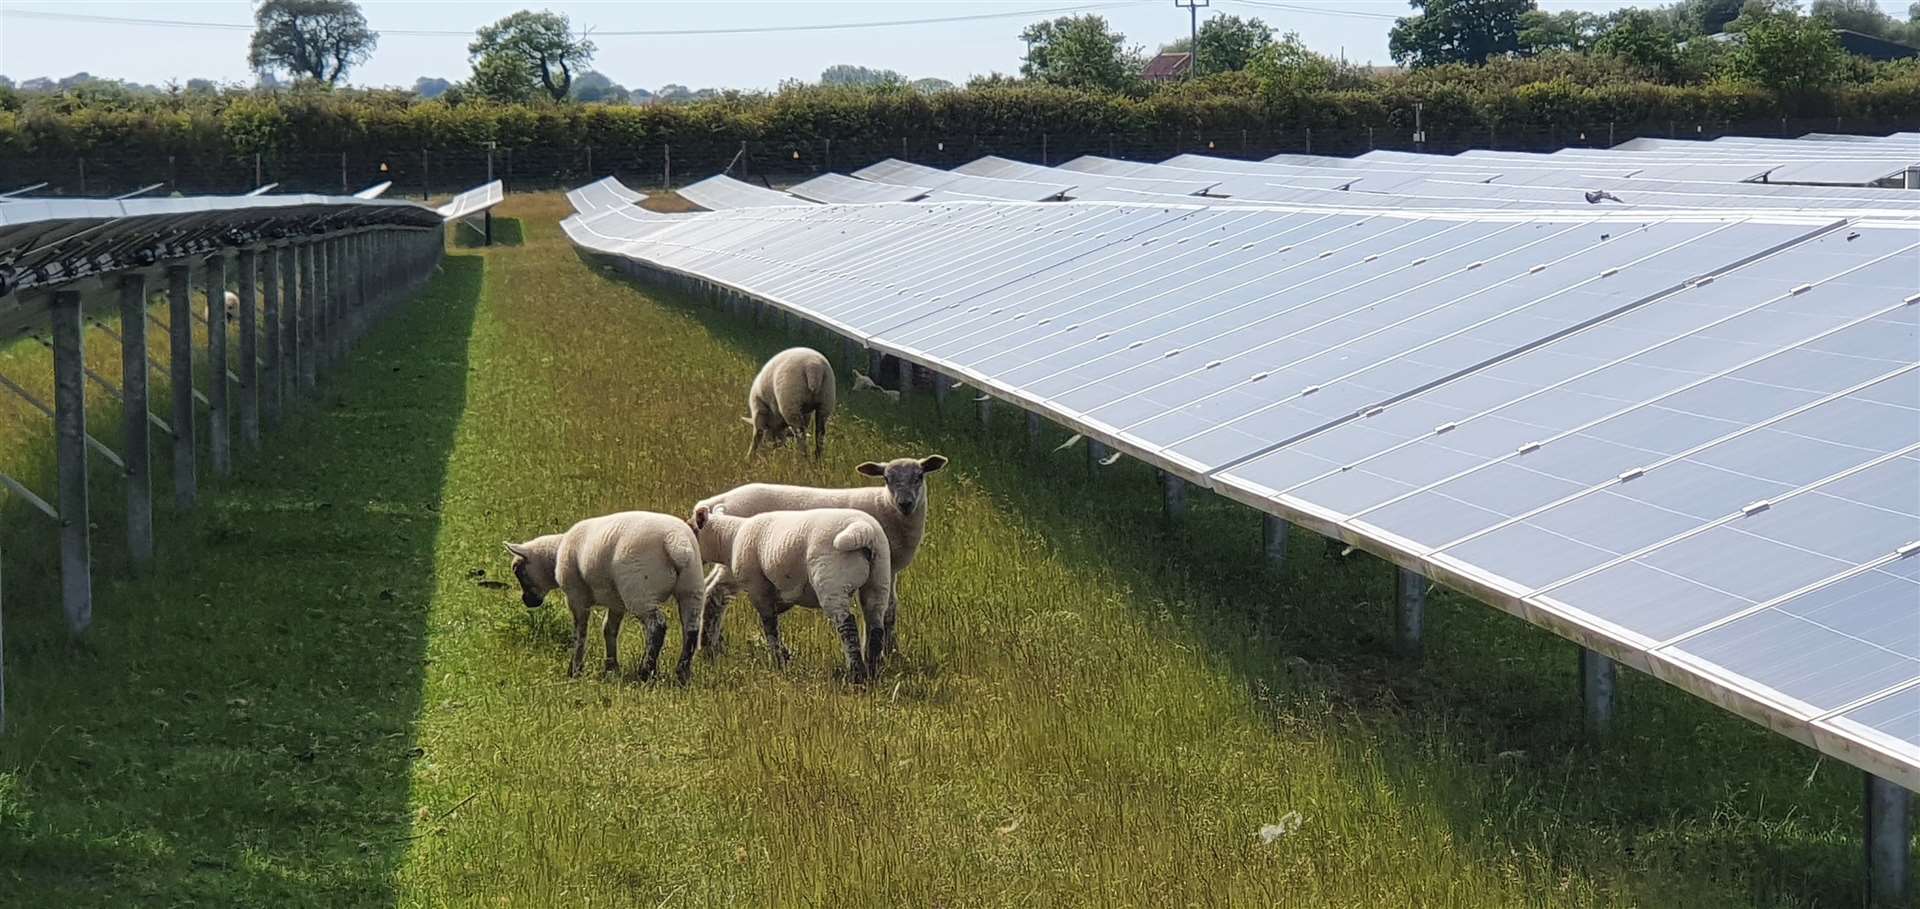 One of Greentech's existing solar farms, where sheep can graze on the land